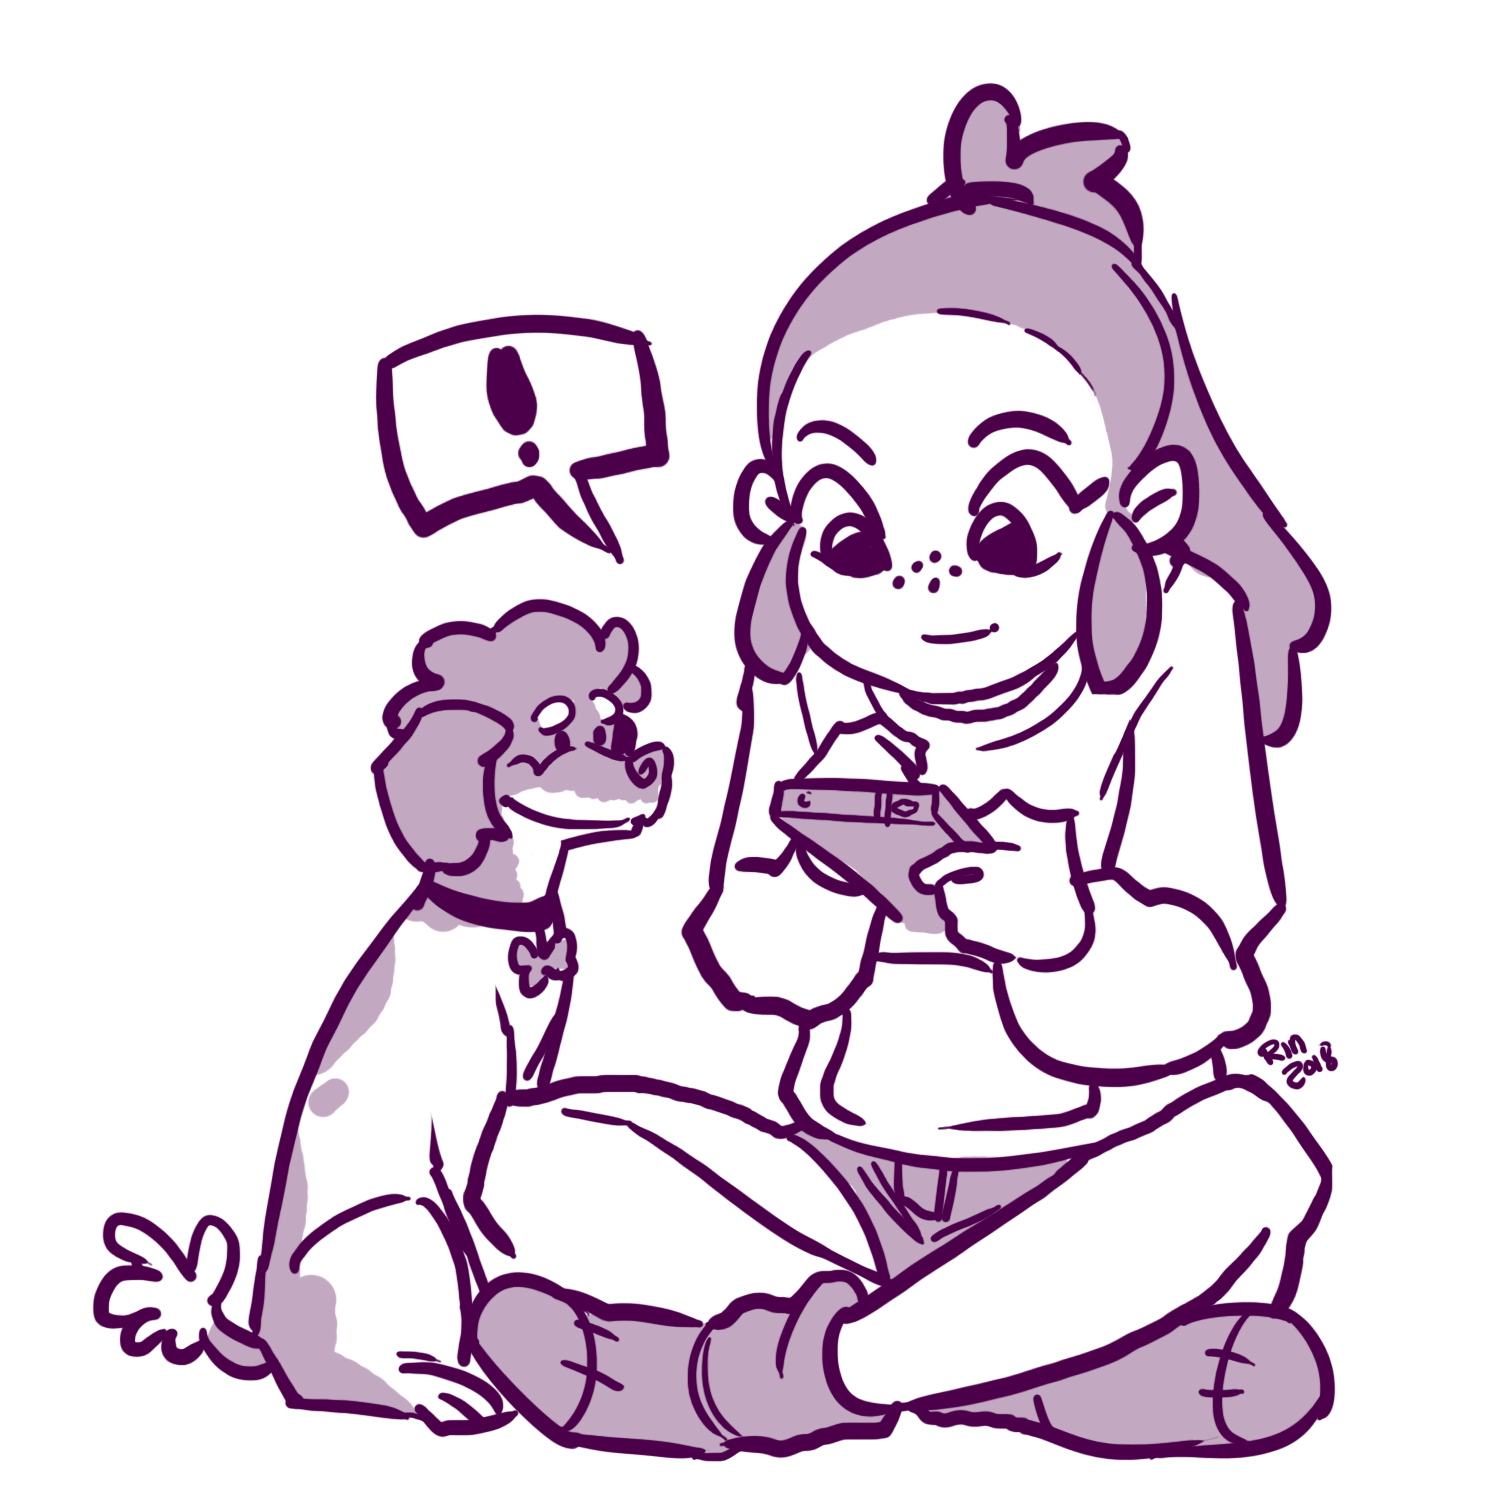 Social Links - Rin using a phone with her dog.